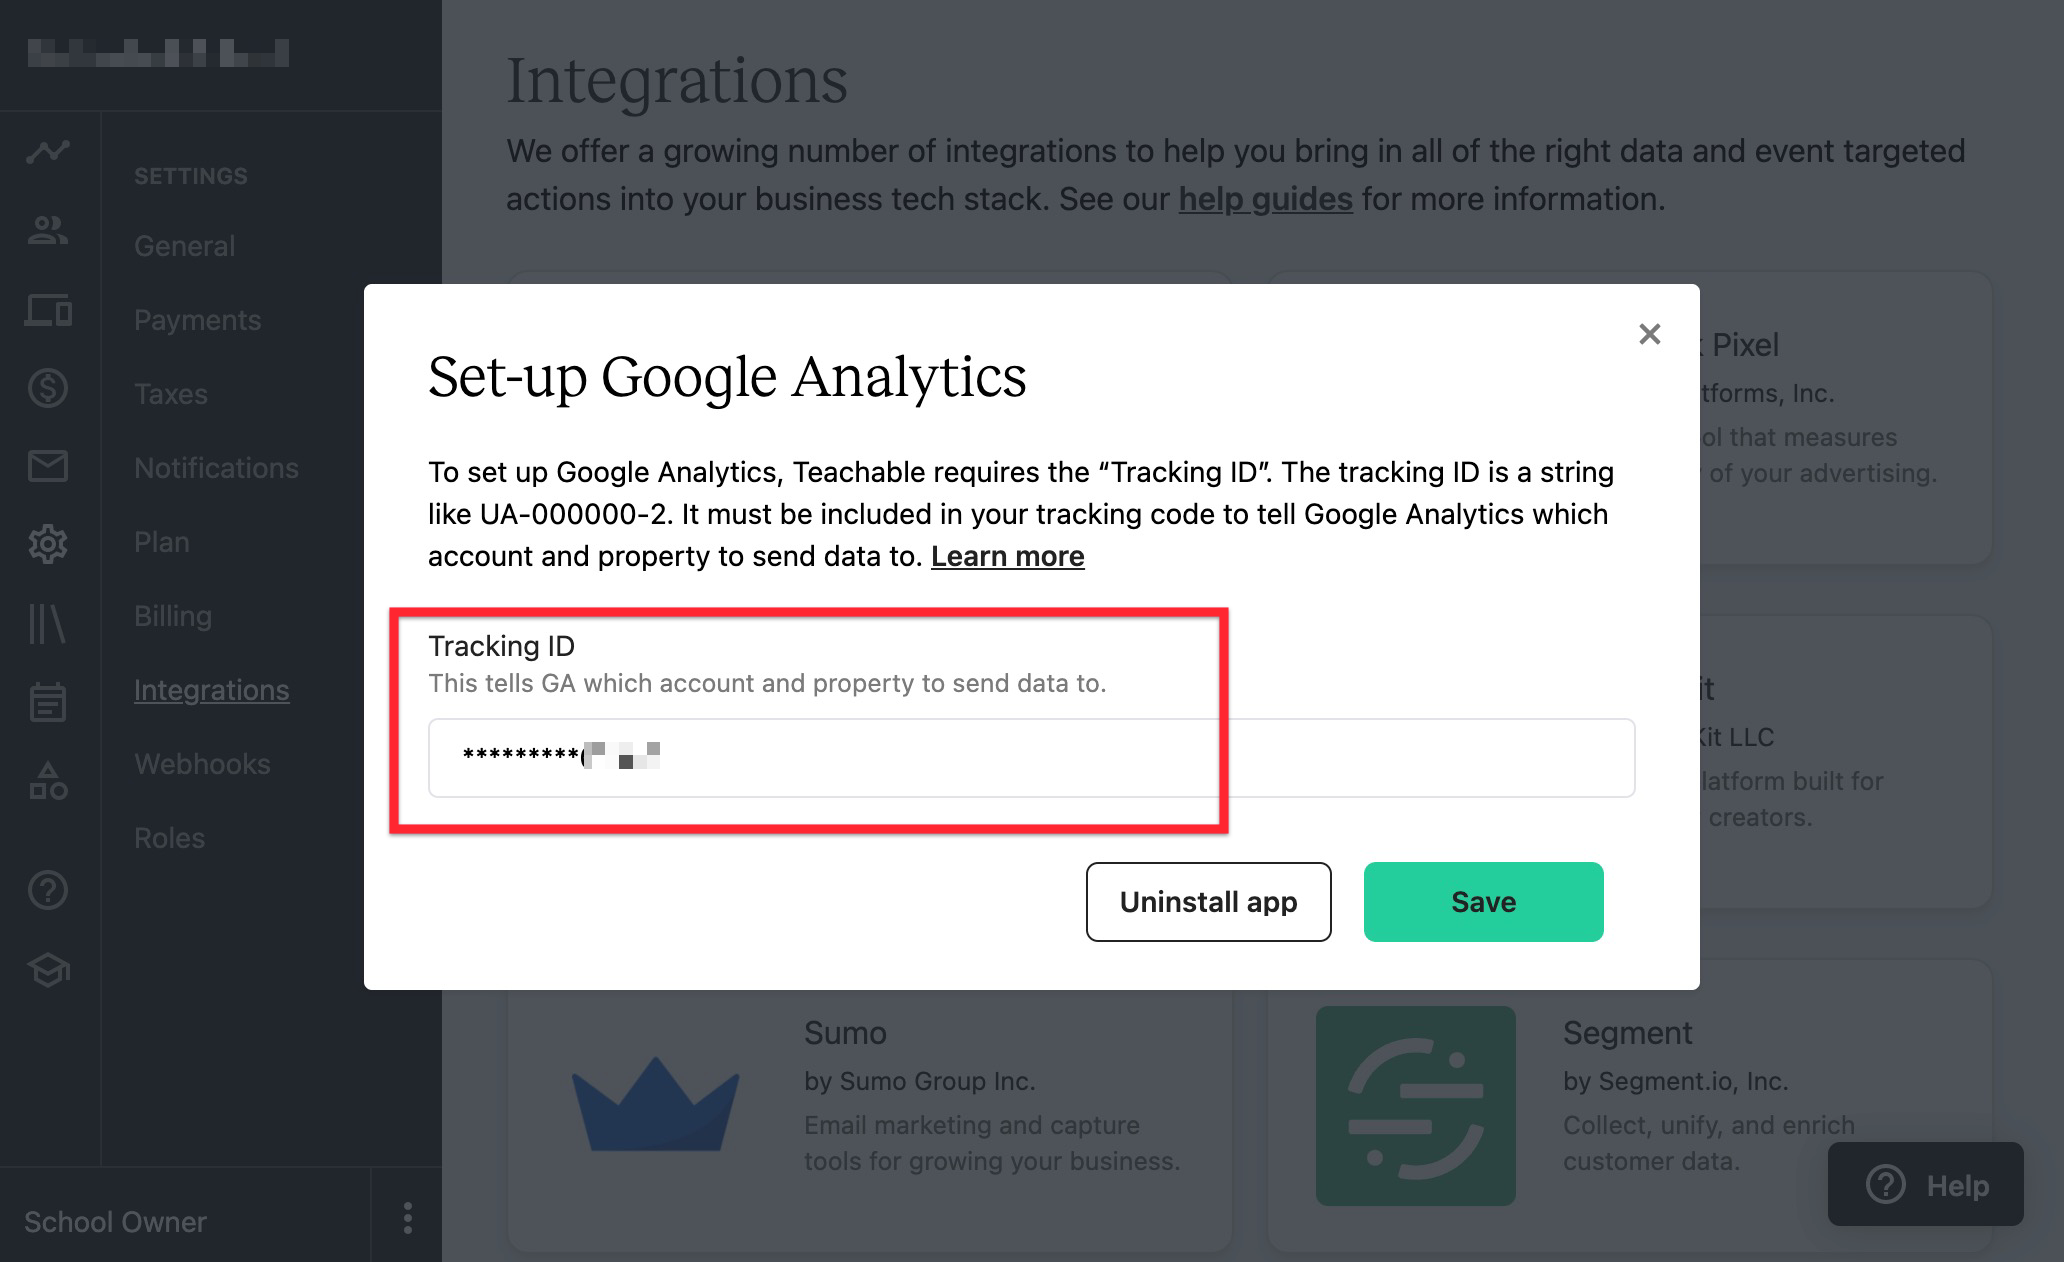 The screen shows the SETTINGS INTEGRATIONS menu of a Teachable school, with a Google Analytics popup open. There is a tracking id listed in the TRACKING ID field.